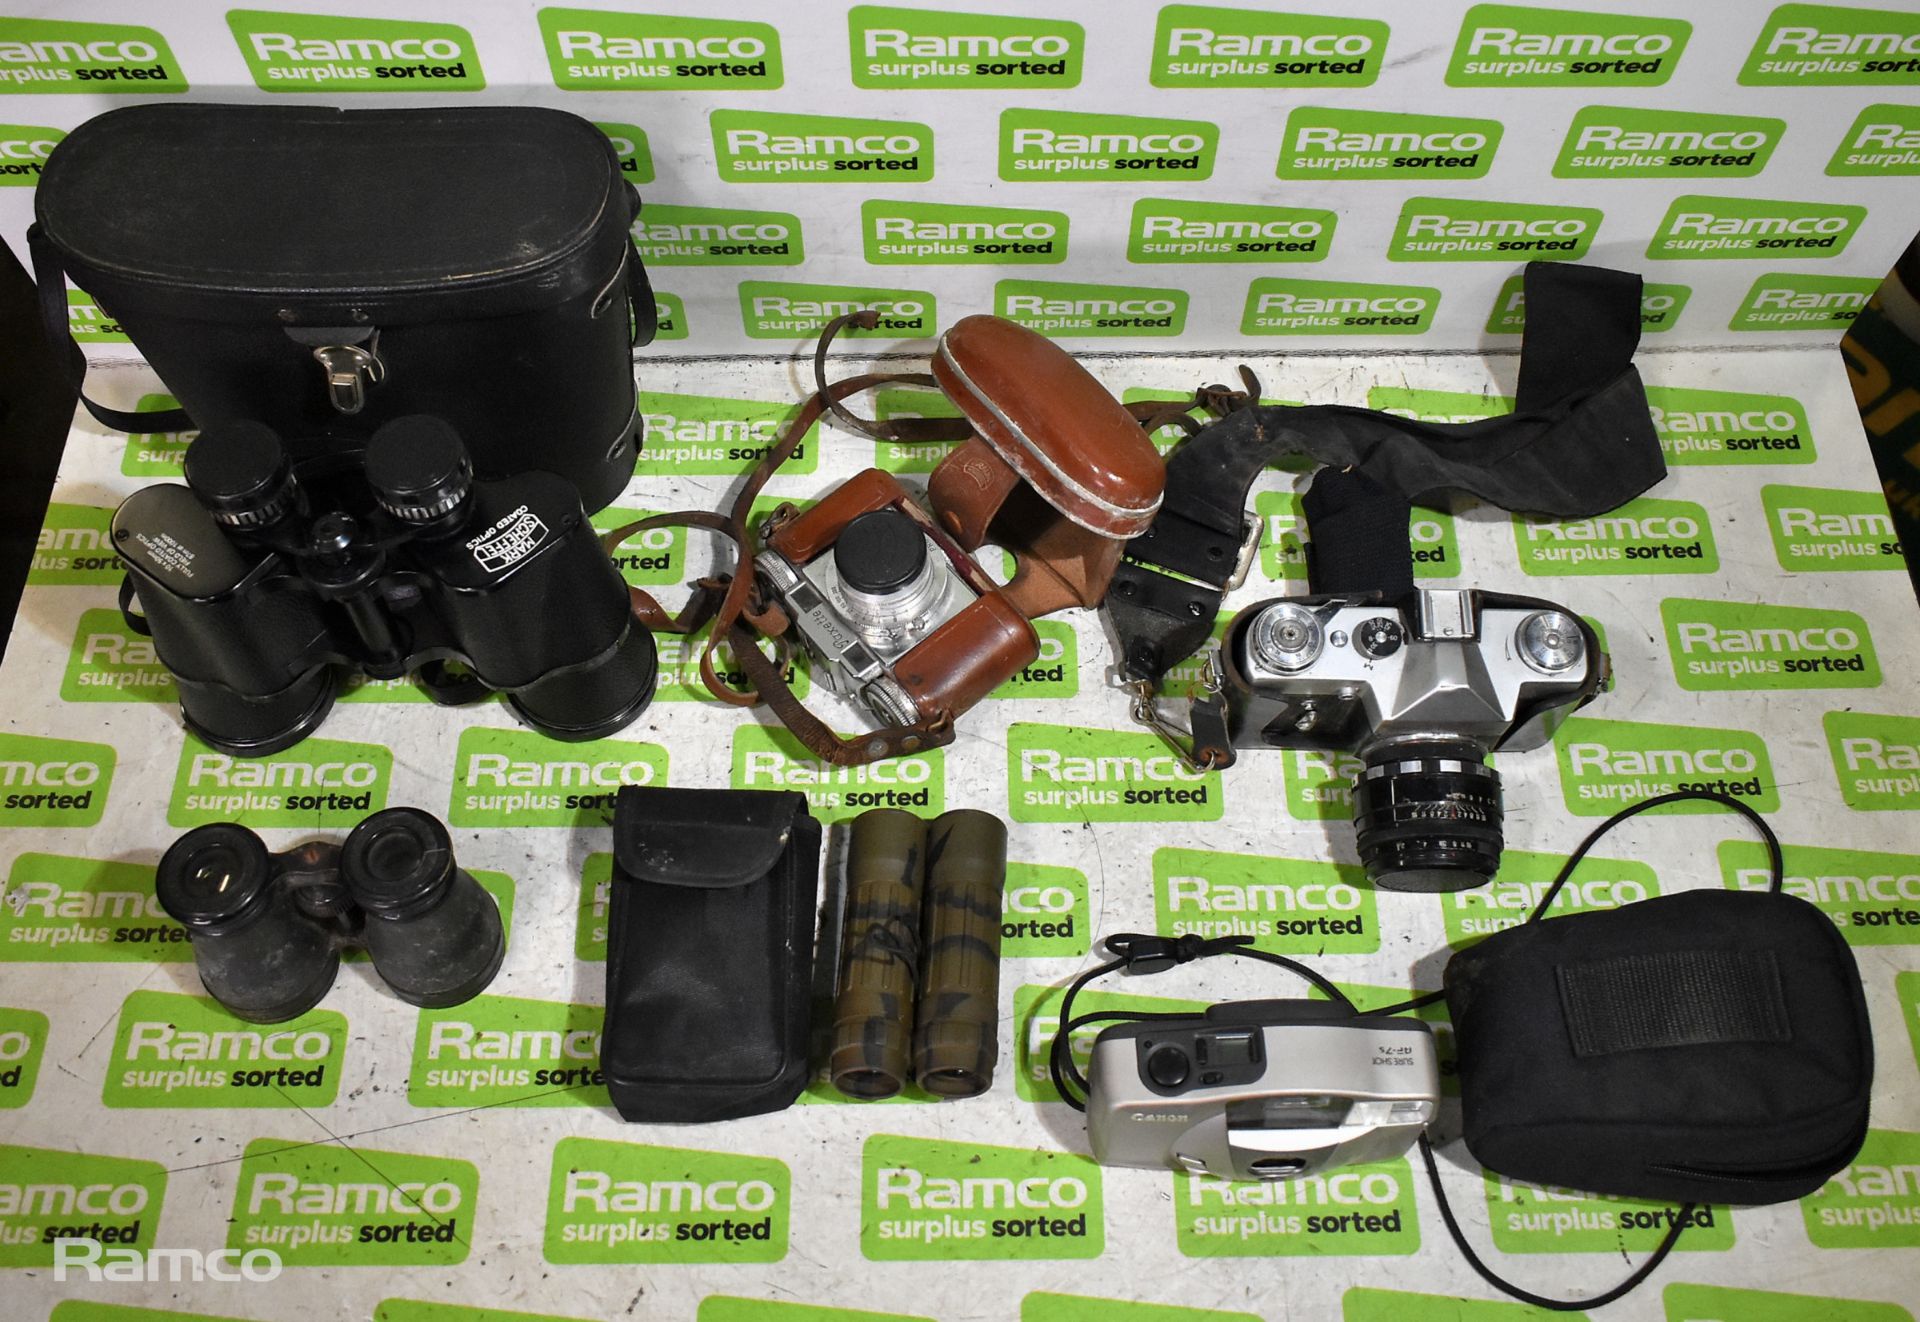 3x Pairs of binoculars and 3x cameras with and without cases - Image 2 of 23